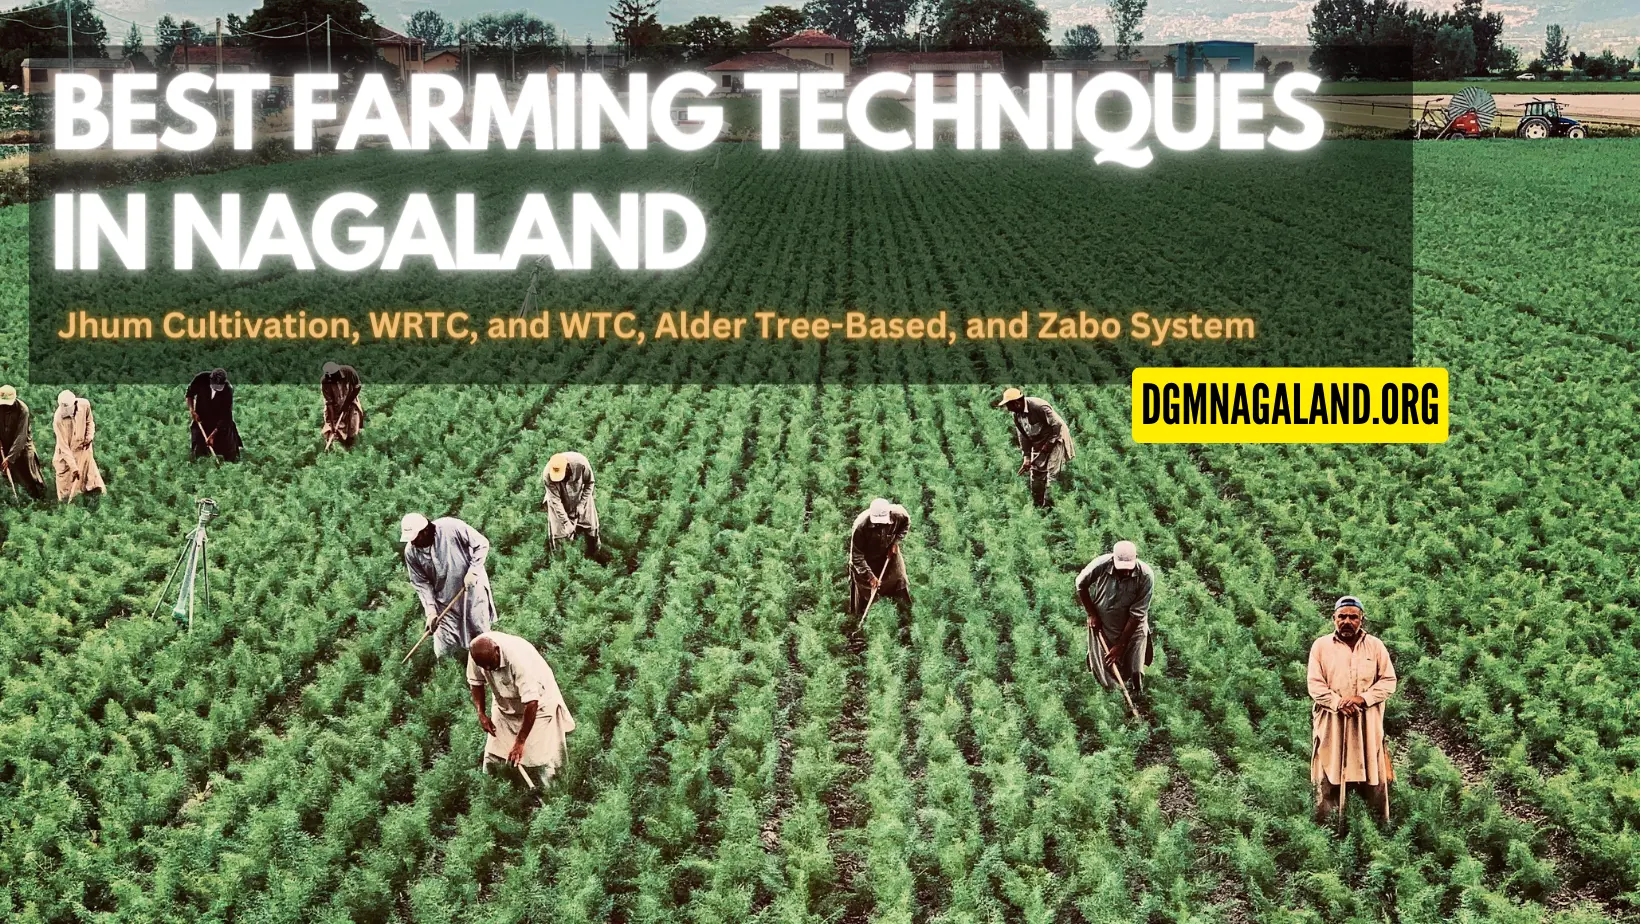 Best Farming Techniques in Nagaland: Jhum Cultivation, WRTC, and WTC, Alder Tree-Based, and Zabo System